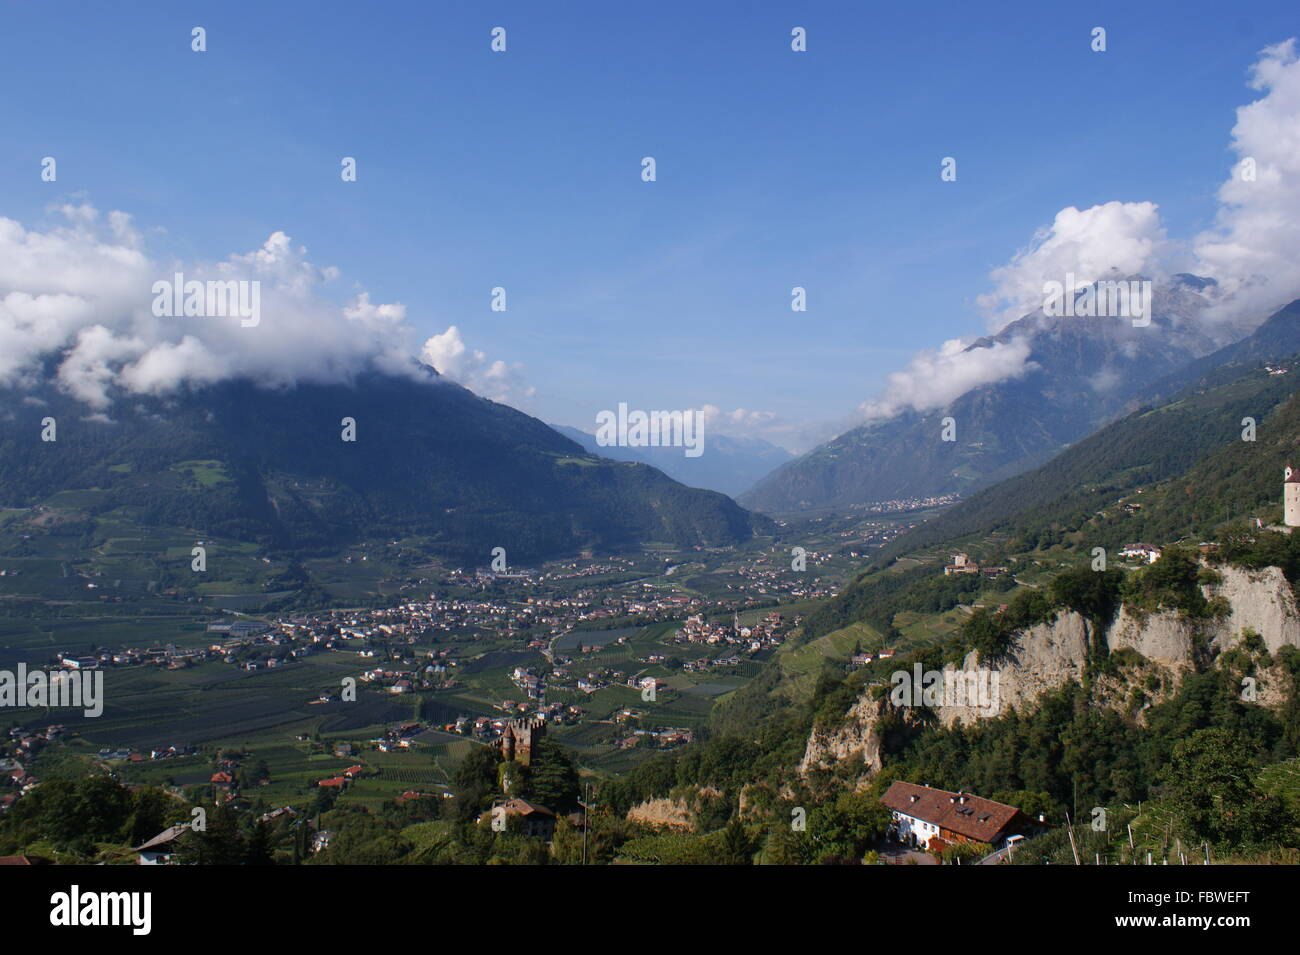 The Vinschgau in South Tyrol, Italy Stock Photo